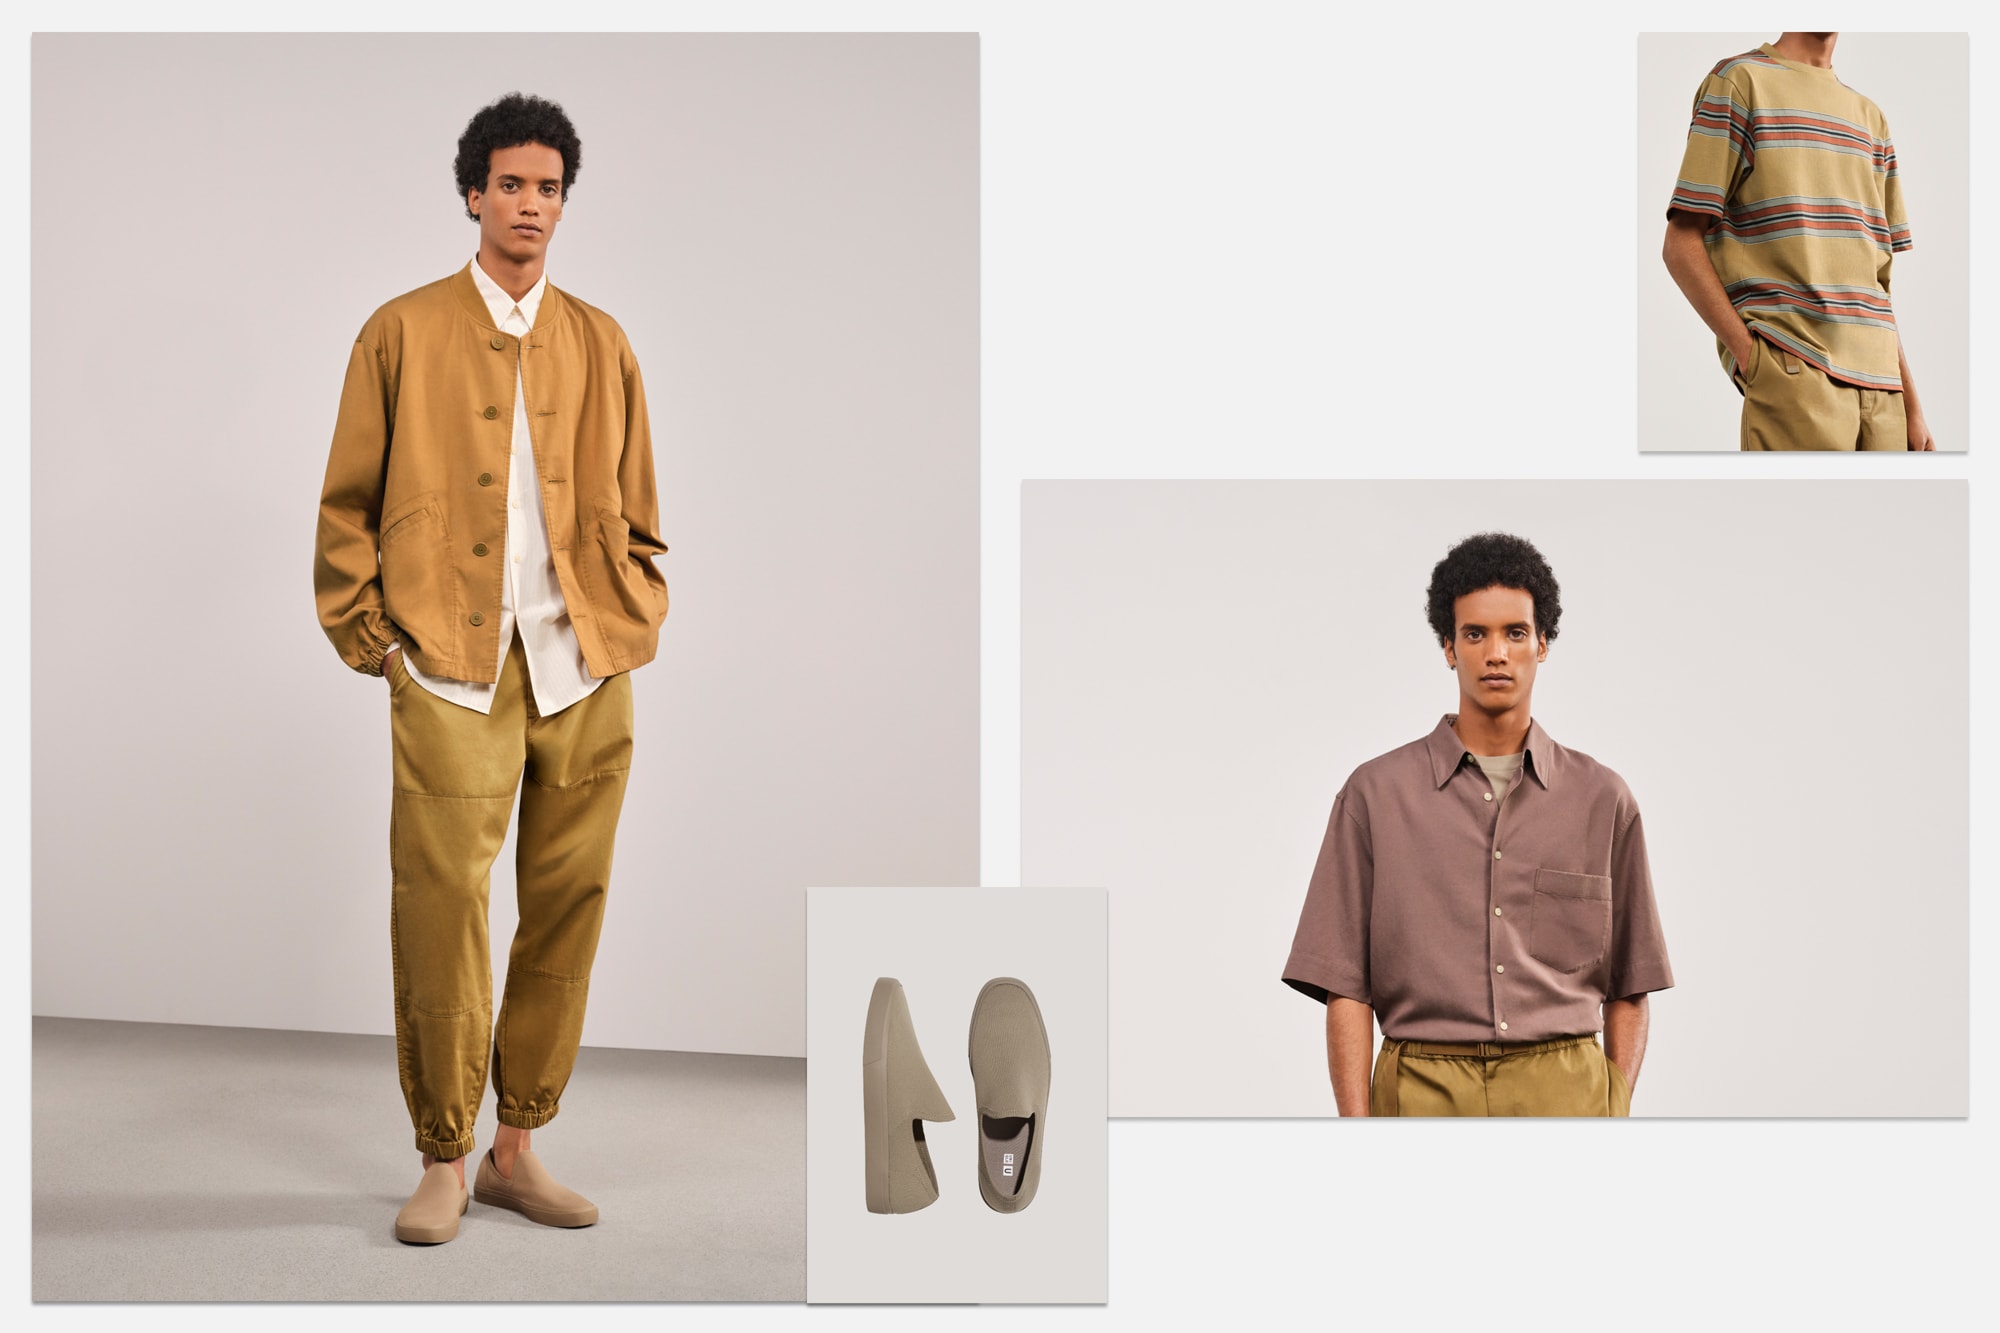 UNIQLO Releases Essentials Lineup Wardrobe Staples Minimalist Neutral T-Shirts Crew Necks Silhouettes Fundamental Cotton Pieces Spring Summer 2022 Collection Shirt Dresses Trench Coat Button-Ups Windbreaker Parisian Style 